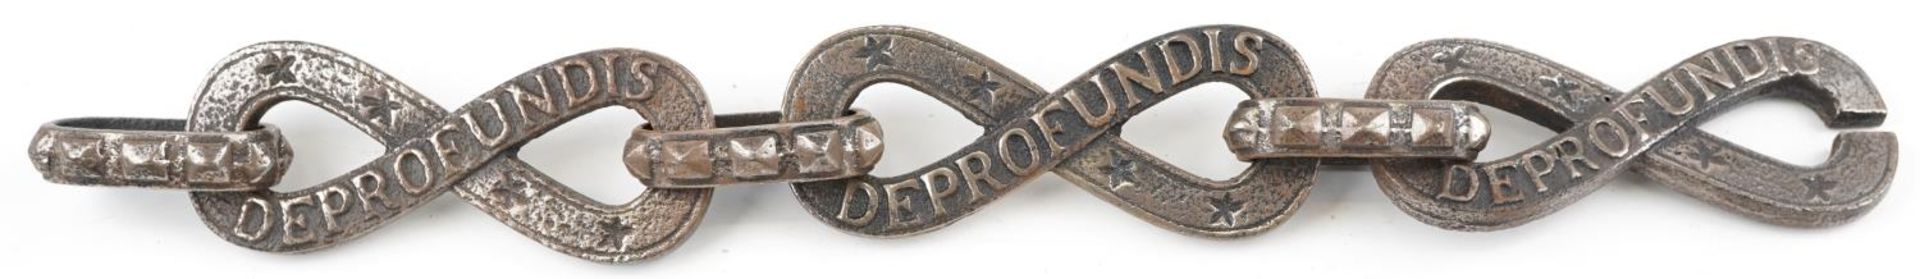 Shipping interest iron chain, possibly part of an anchor chain, each cast with the word Deprofundis, - Image 2 of 3